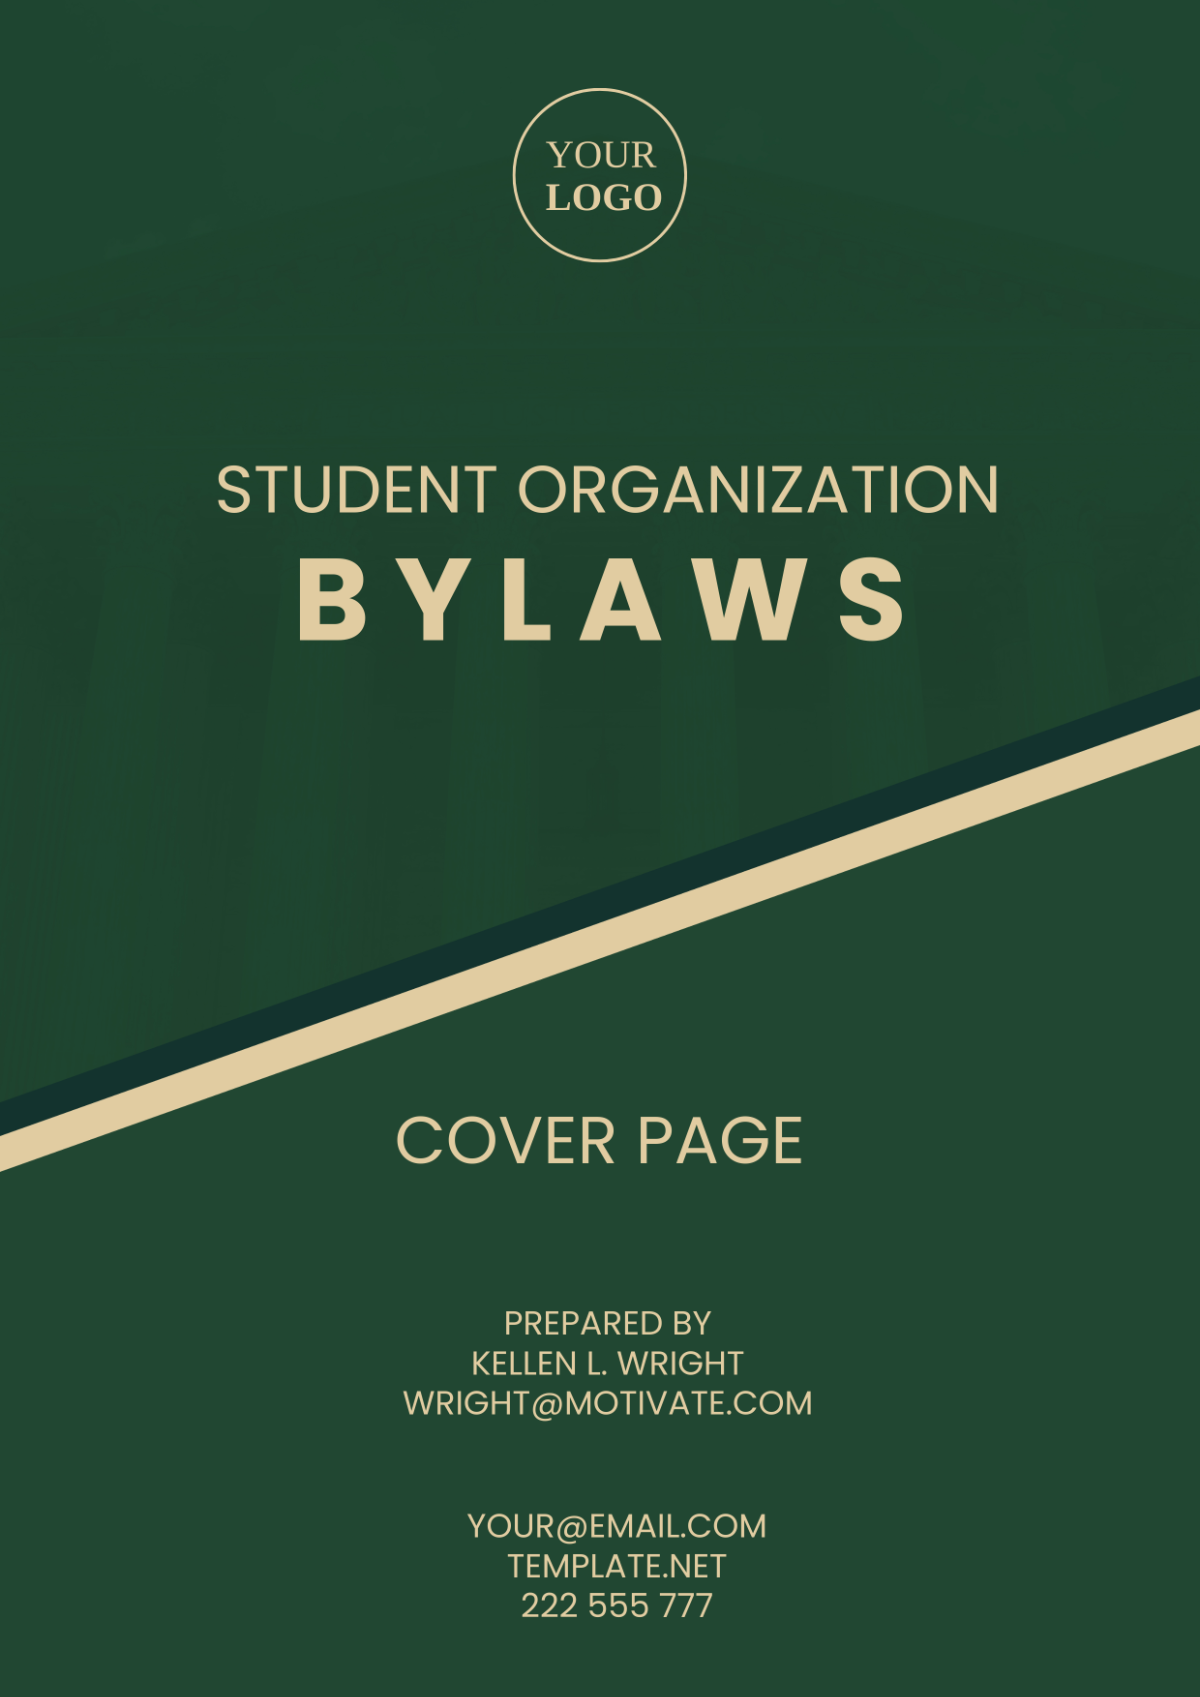 Free Student Organization Bylaws Cover Page Template